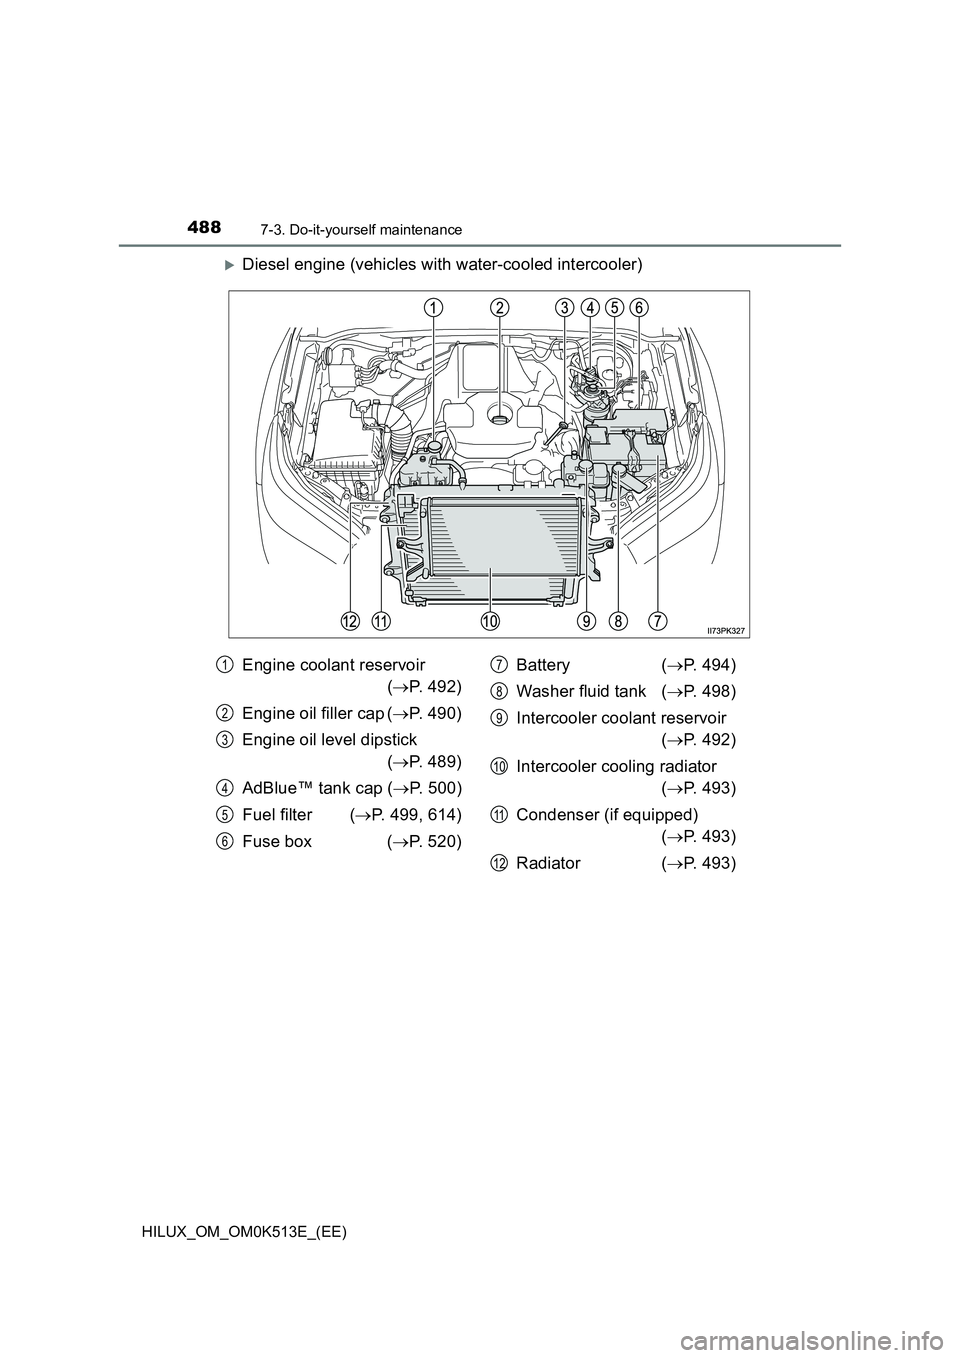 TOYOTA HILUX 2022  Owners Manual 4887-3. Do-it-yourself maintenance
HILUX_OM_OM0K513E_(EE)
Diesel engine (vehicles with water-cooled intercooler)
Engine coolant reservoir  
( P. 492) 
Engine oil filler cap ( P. 490) 
Engine 